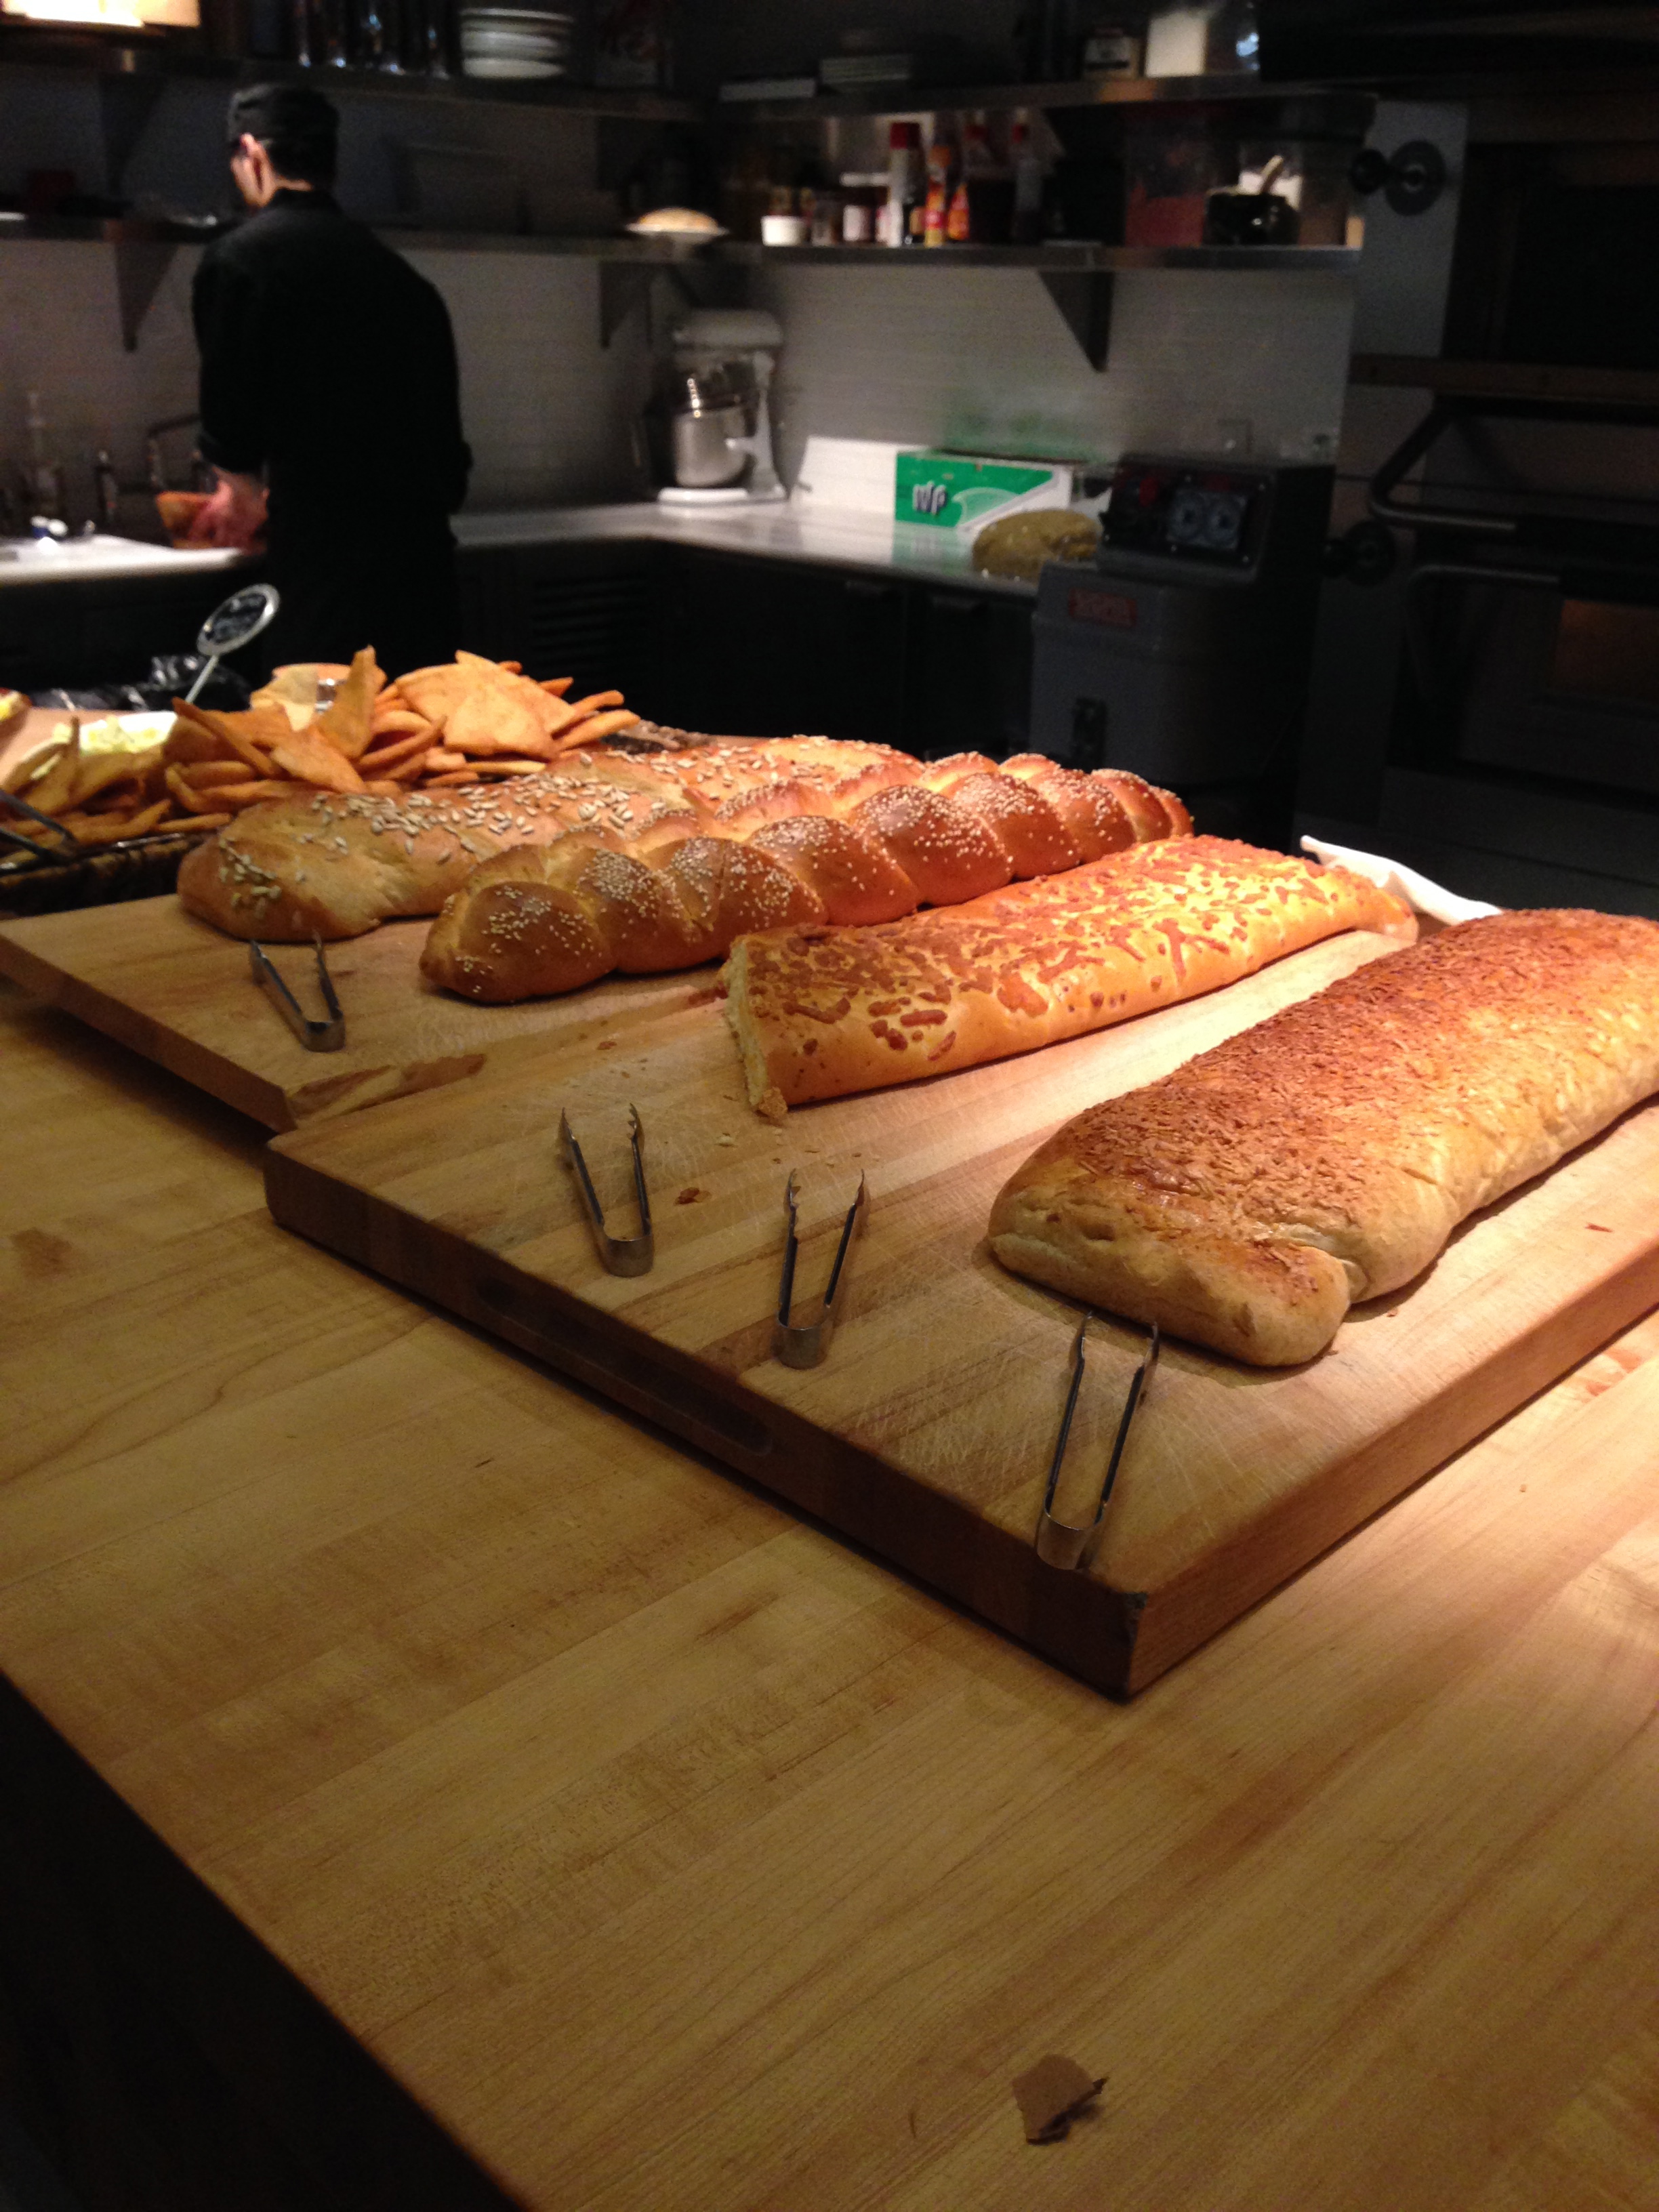 The bread station.